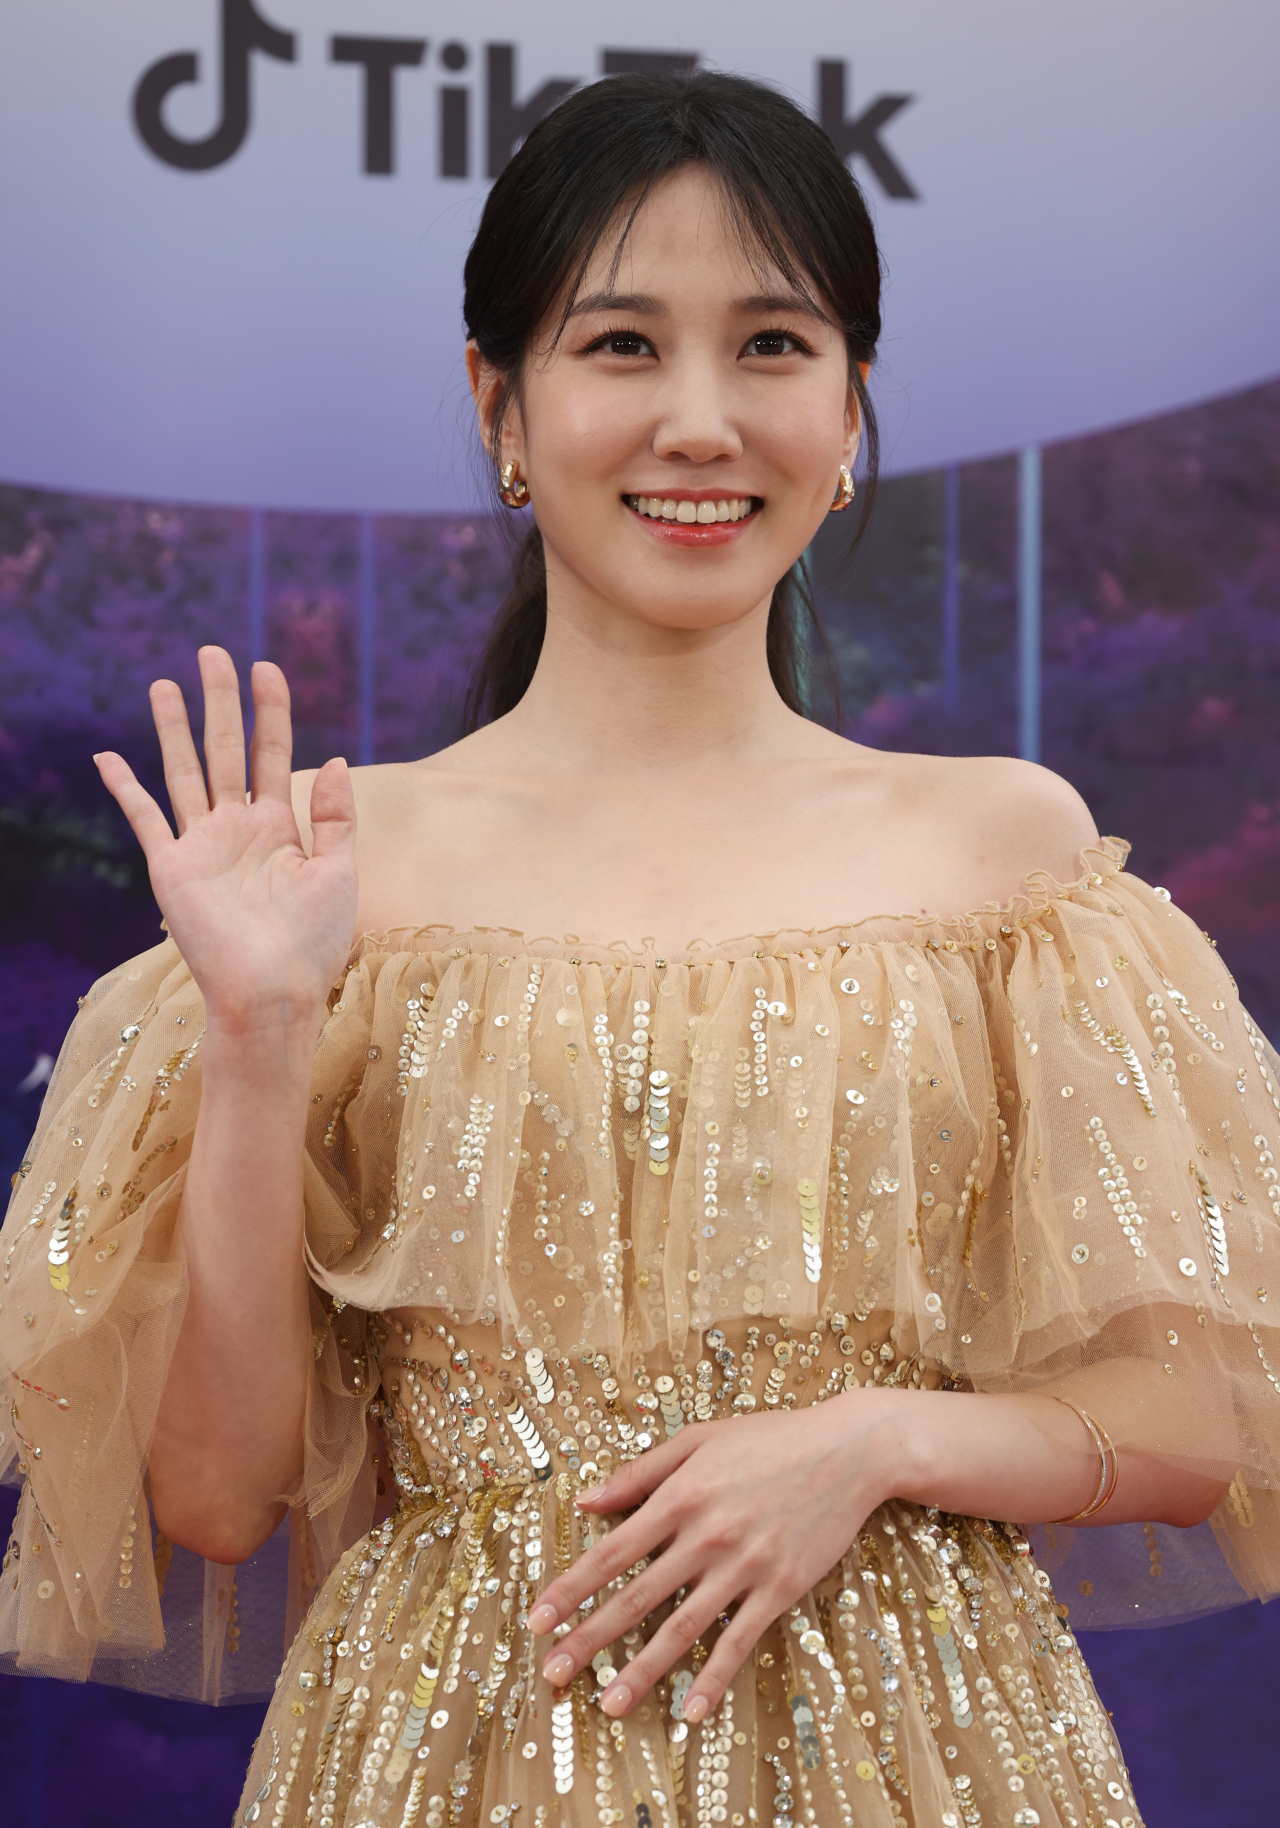 Actress Park Eun-bin poses for a photo on the red carpet of the 59th Baeksang Arts Awards ceremony in Incheon on Friday. (Yonhap)